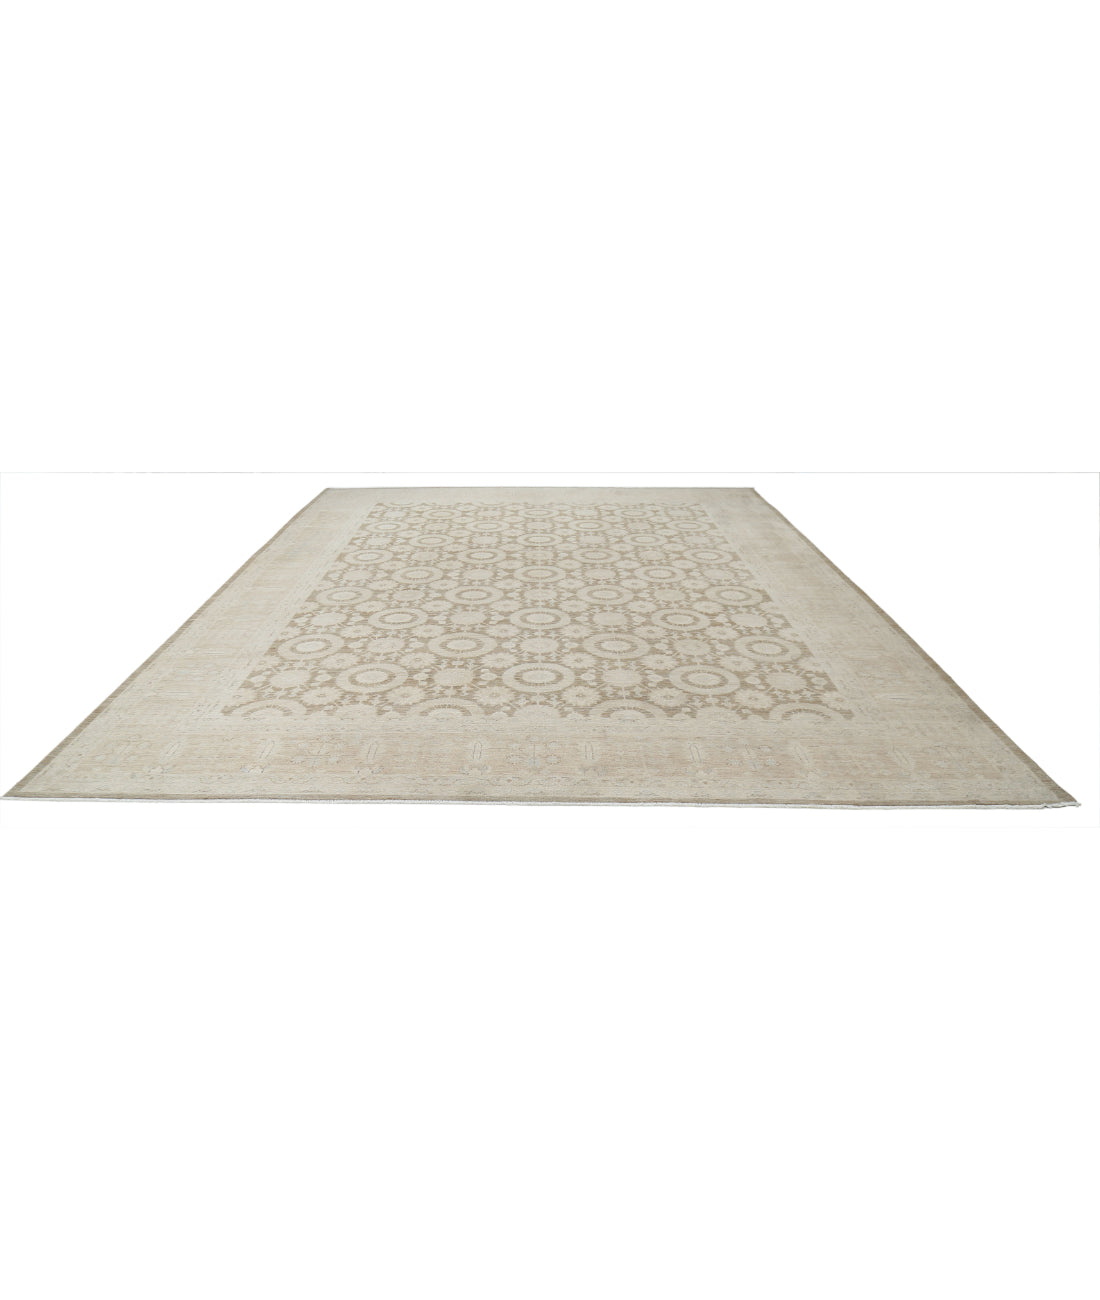 Hand Knotted Serenity Wool Rug - 7'8'' x 9'10'' 7'8'' x 9'10'' (230 X 295) / Taupe / Ivory